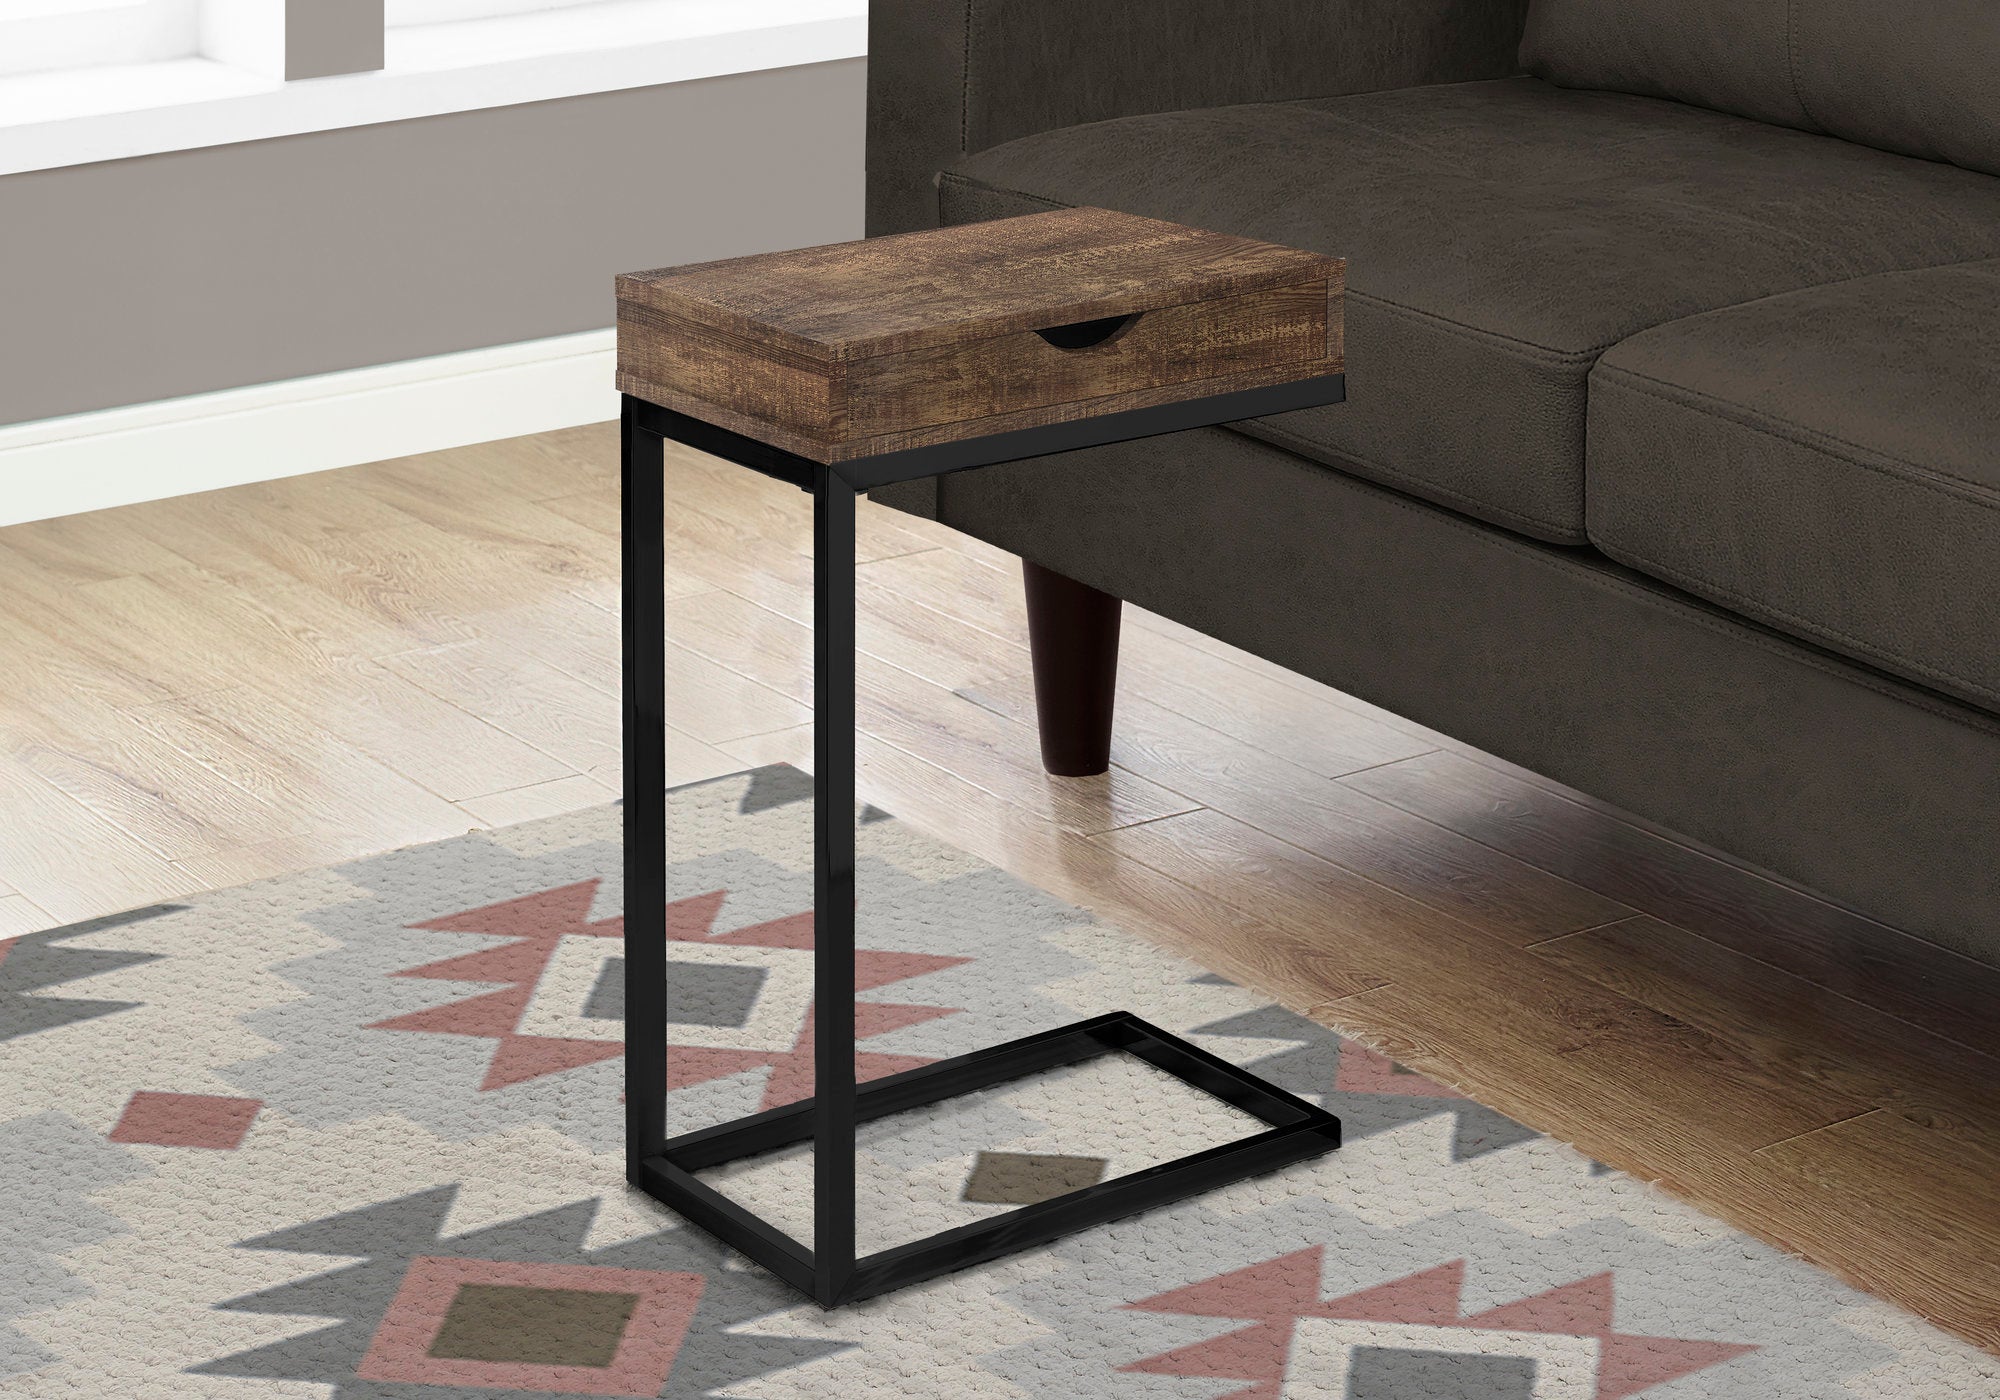 MN-493406    Accent Table, C-Shaped, End, Side, Snack, Living Room, Bedroom, Storage Drawer, Metal Legs, Laminate, Brown Reclaimed Wood Look, Black, Contemporary, Modern